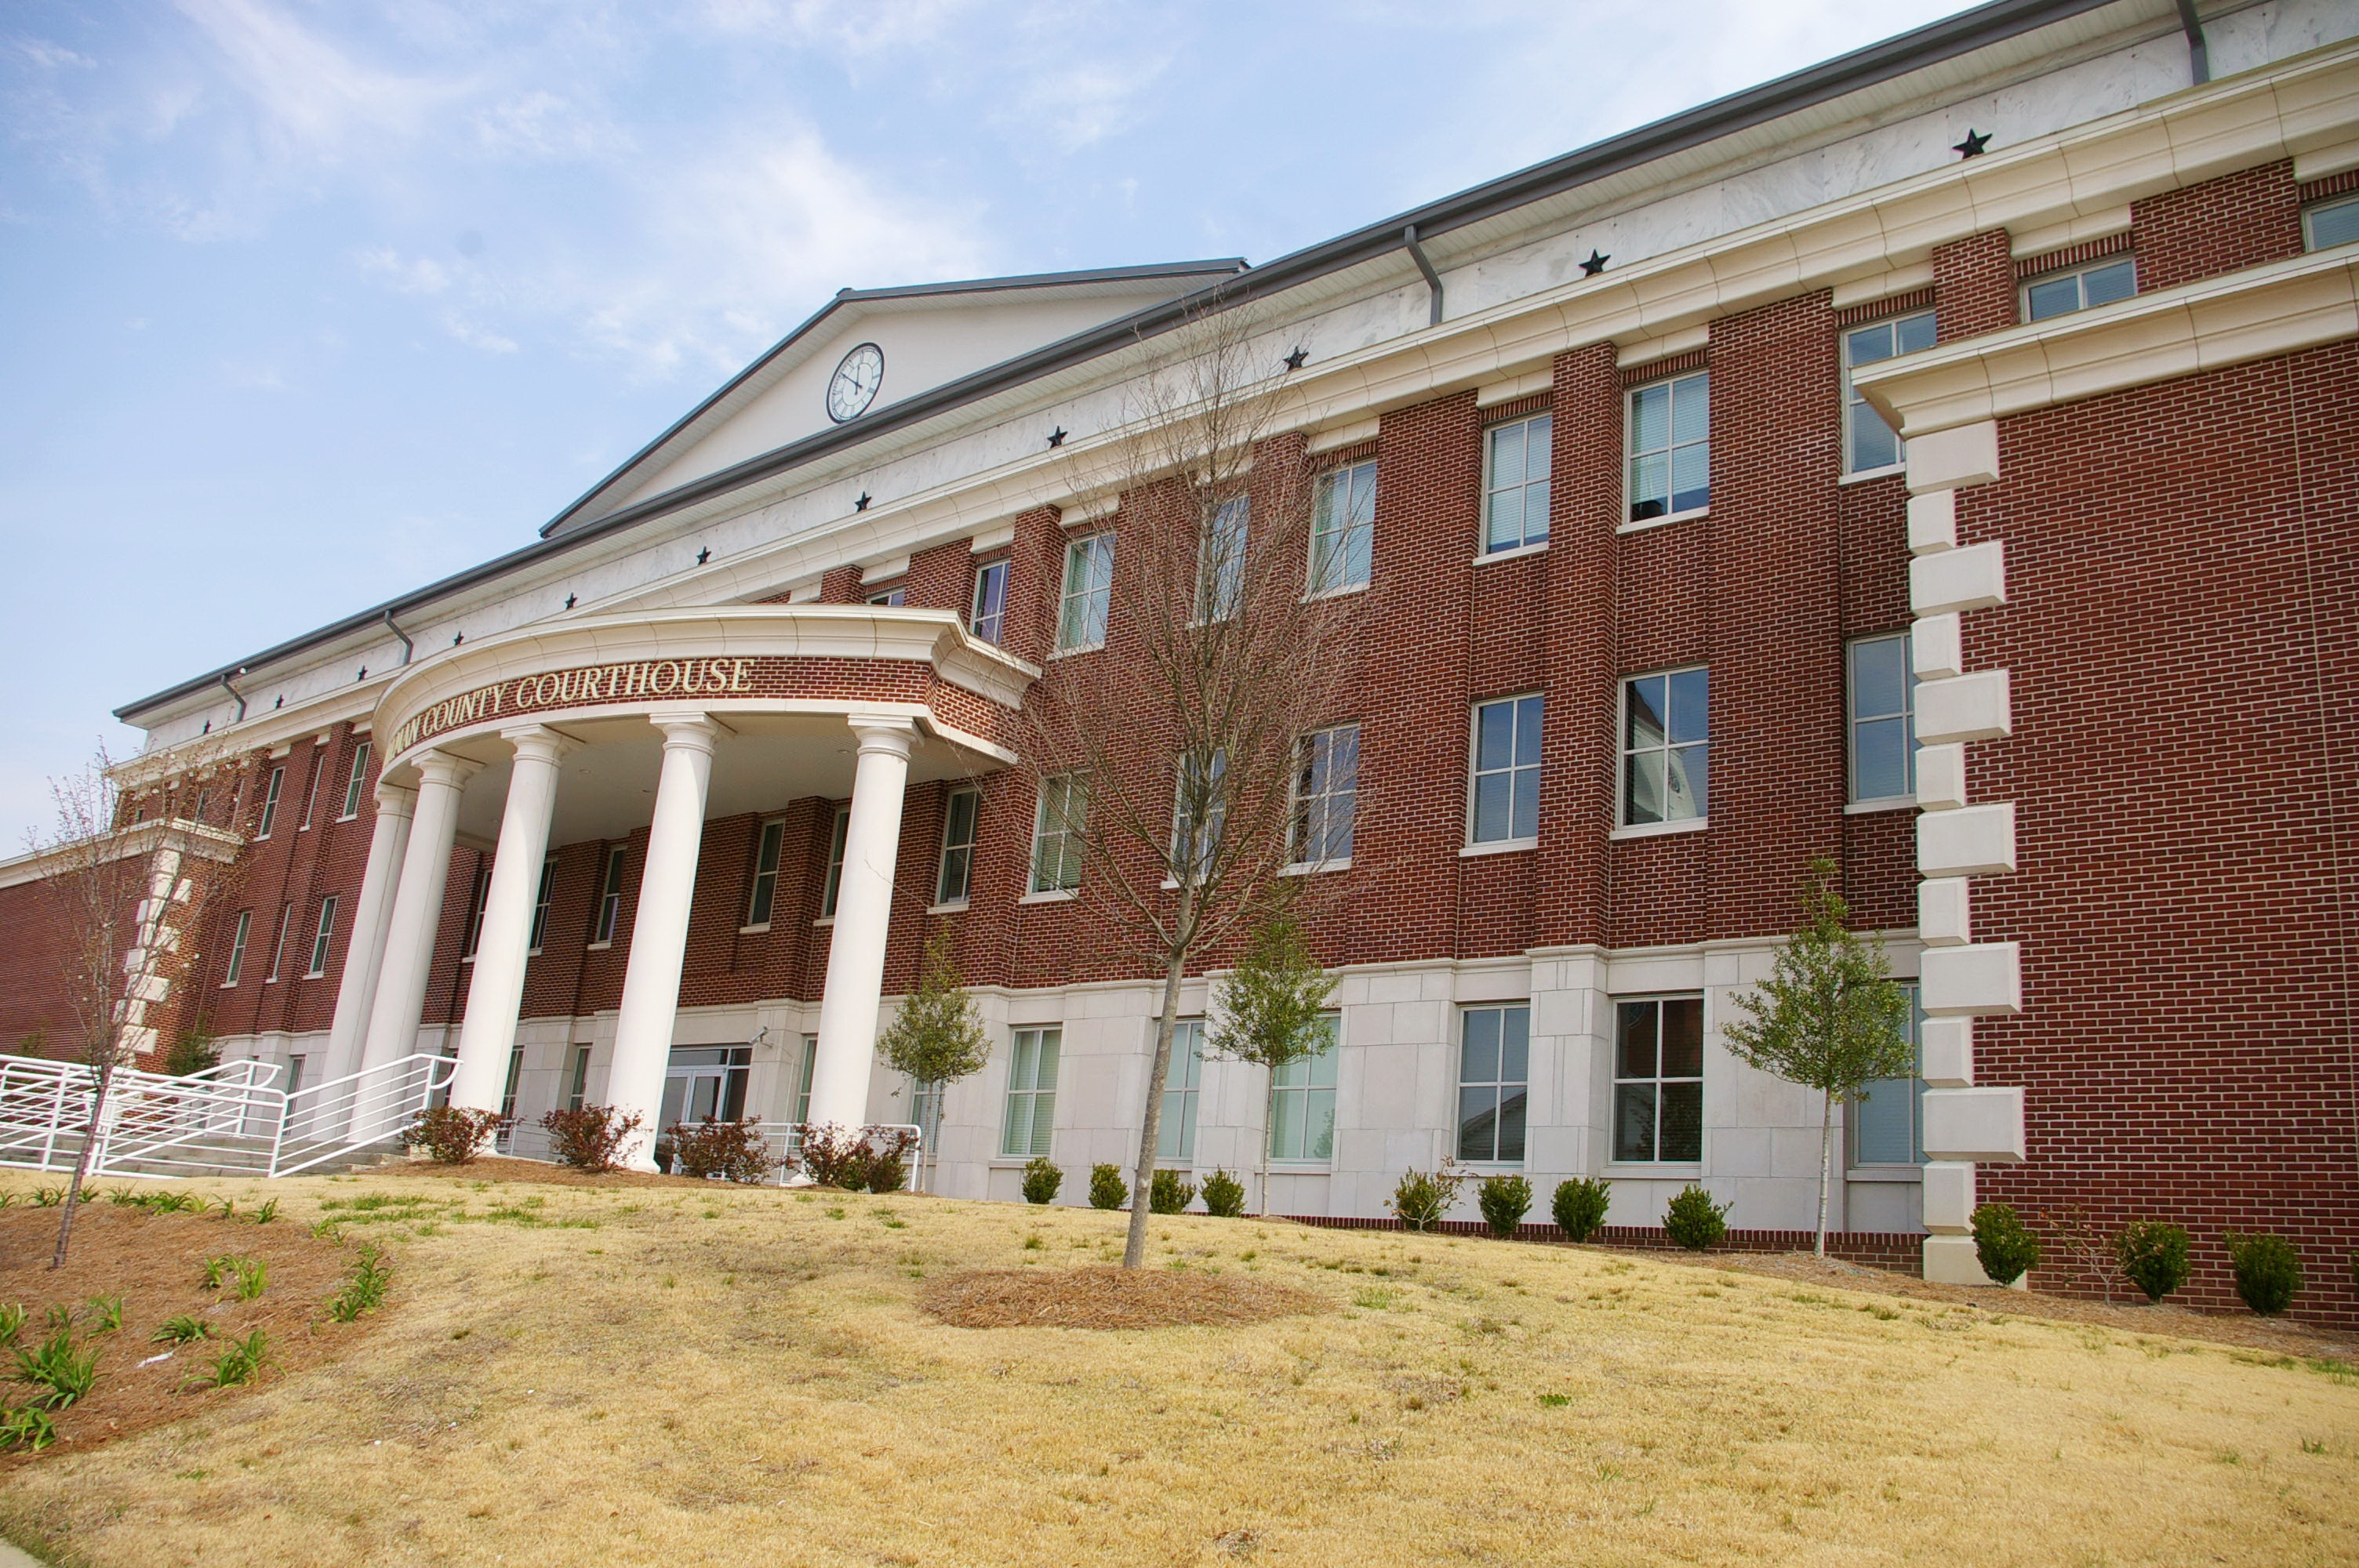 Cullman County | US Courthouses